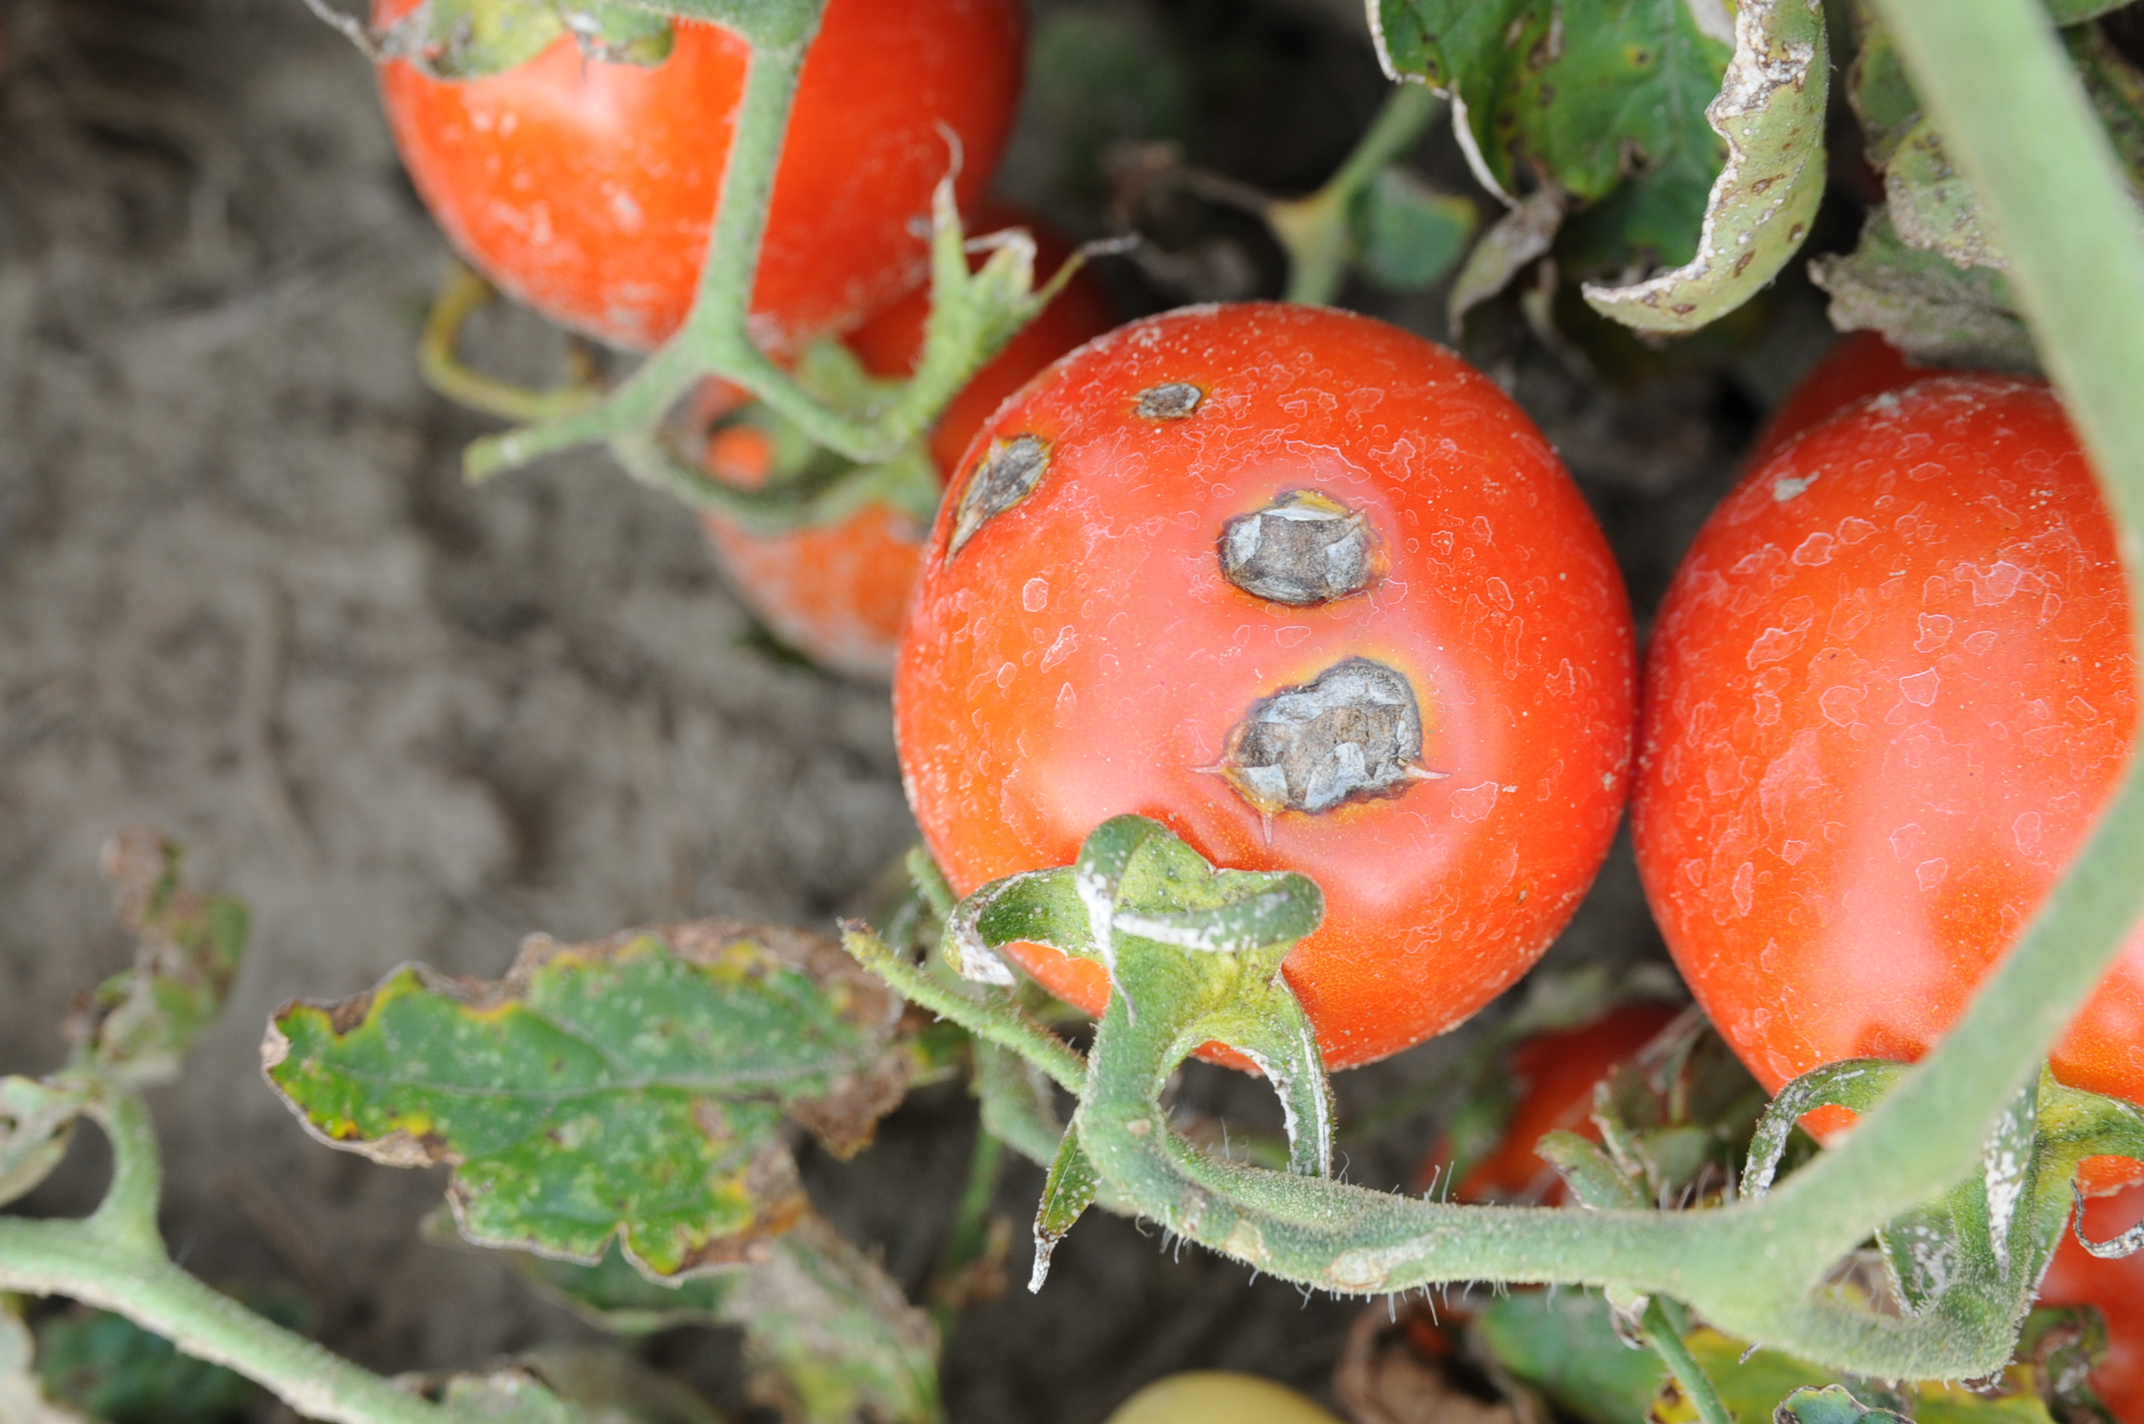 Bacterial spot lesions on processing tomato fruit